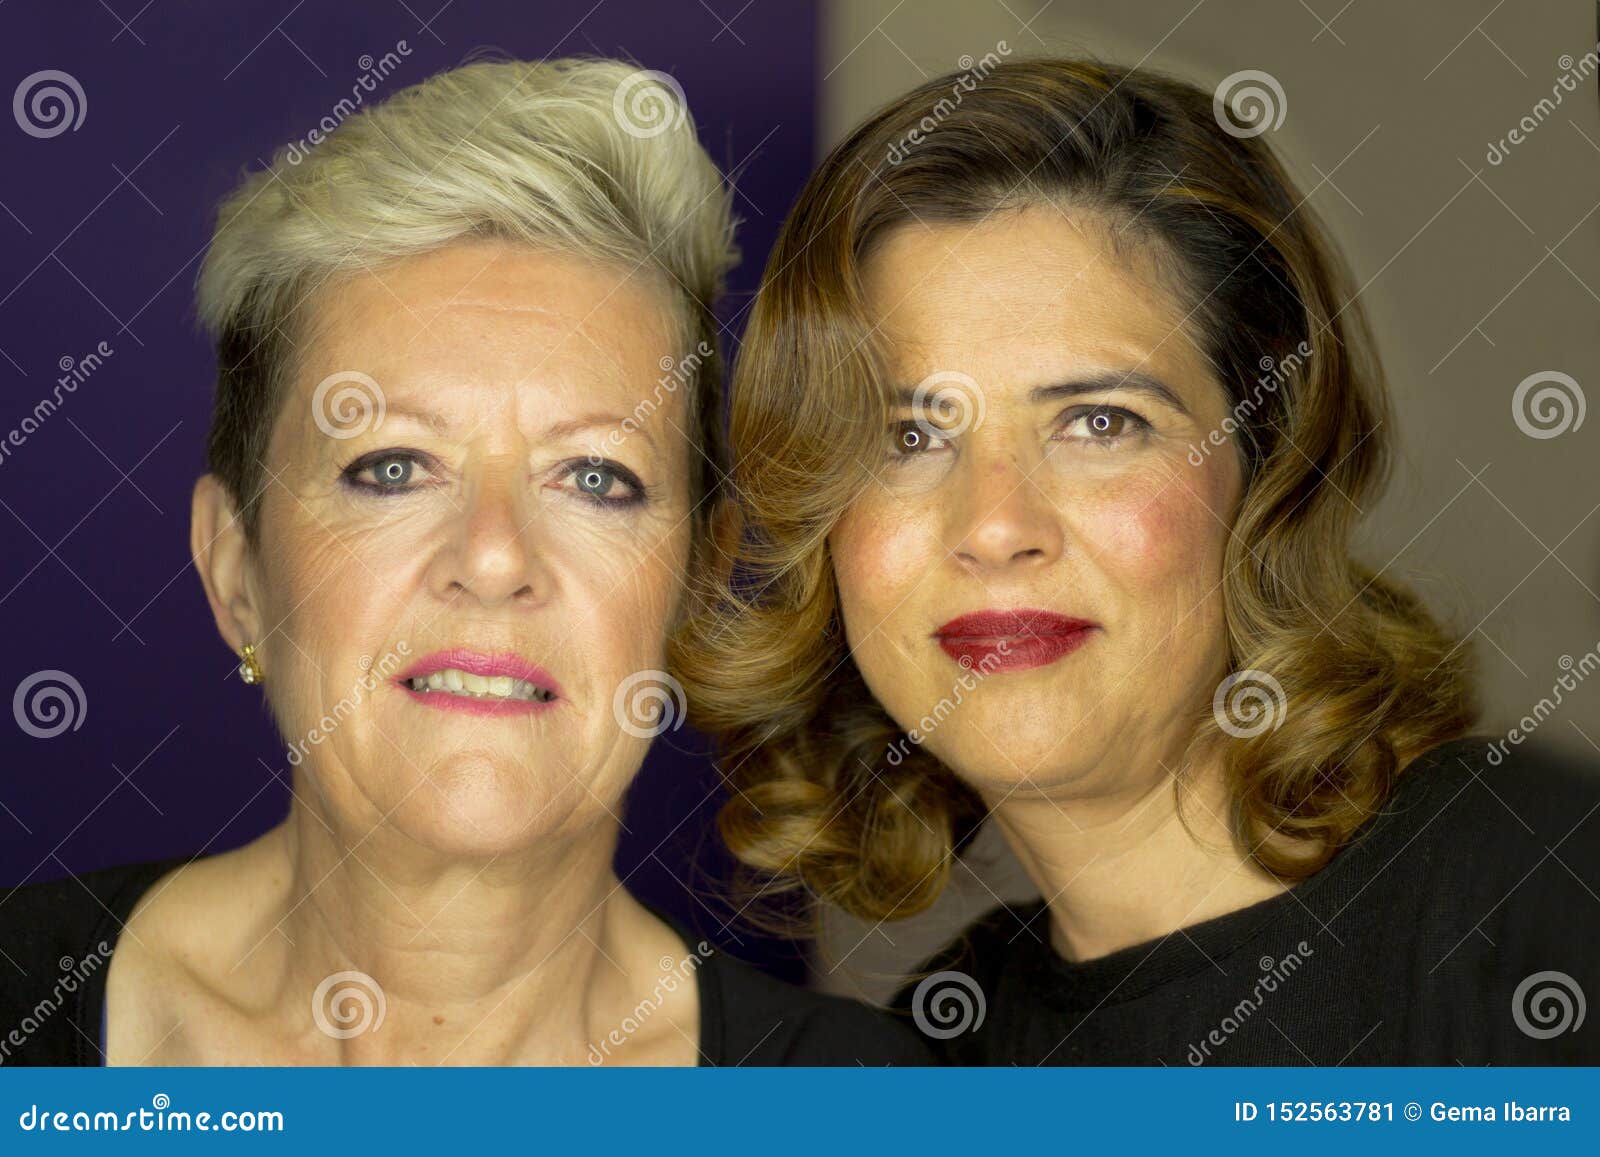 Portrait of Two Mature Women with Different Hair Style Stock Image - Image  of face, senior: 152563781